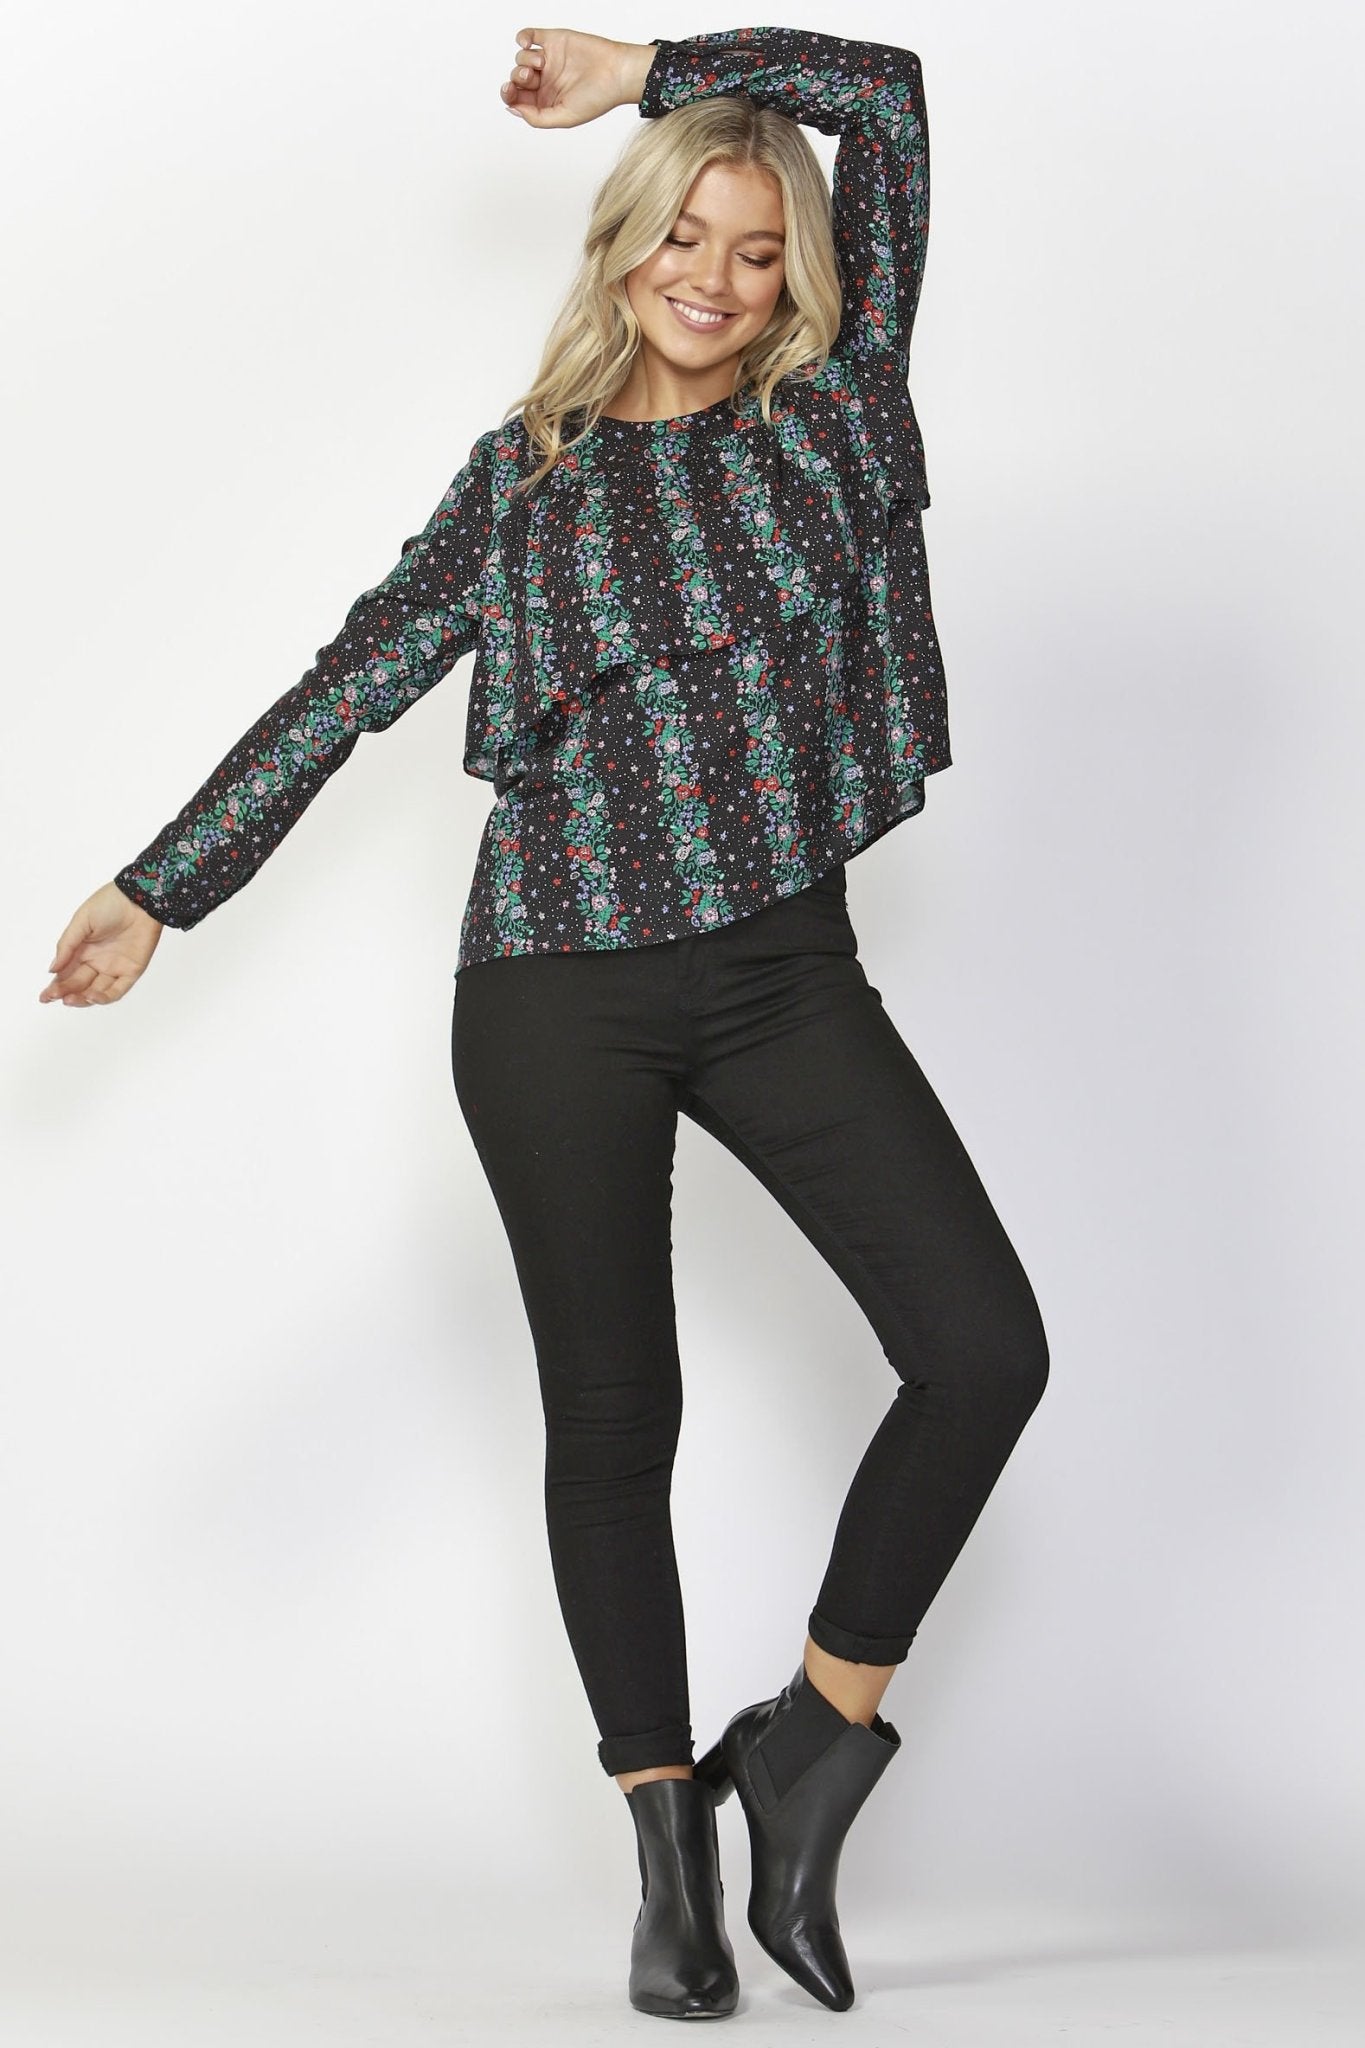 Sass Falling Florals Layered Blouse in Print - Hey Sara